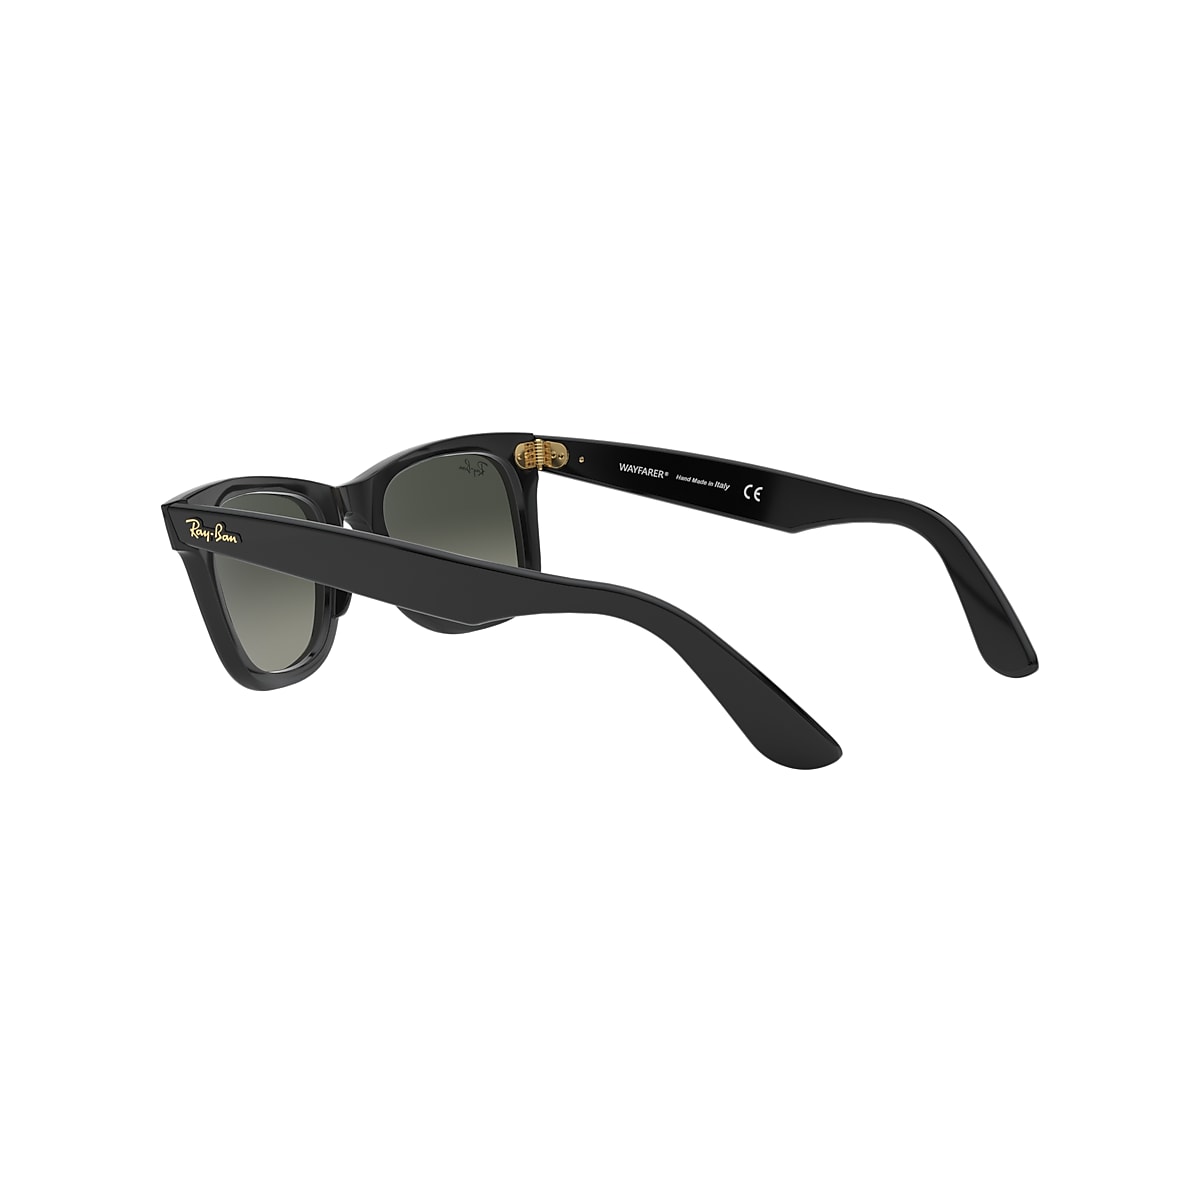 ORIGINAL @COLLECTION Sunglasses in Black and Grey - RB2140 | Ray- Ban® US